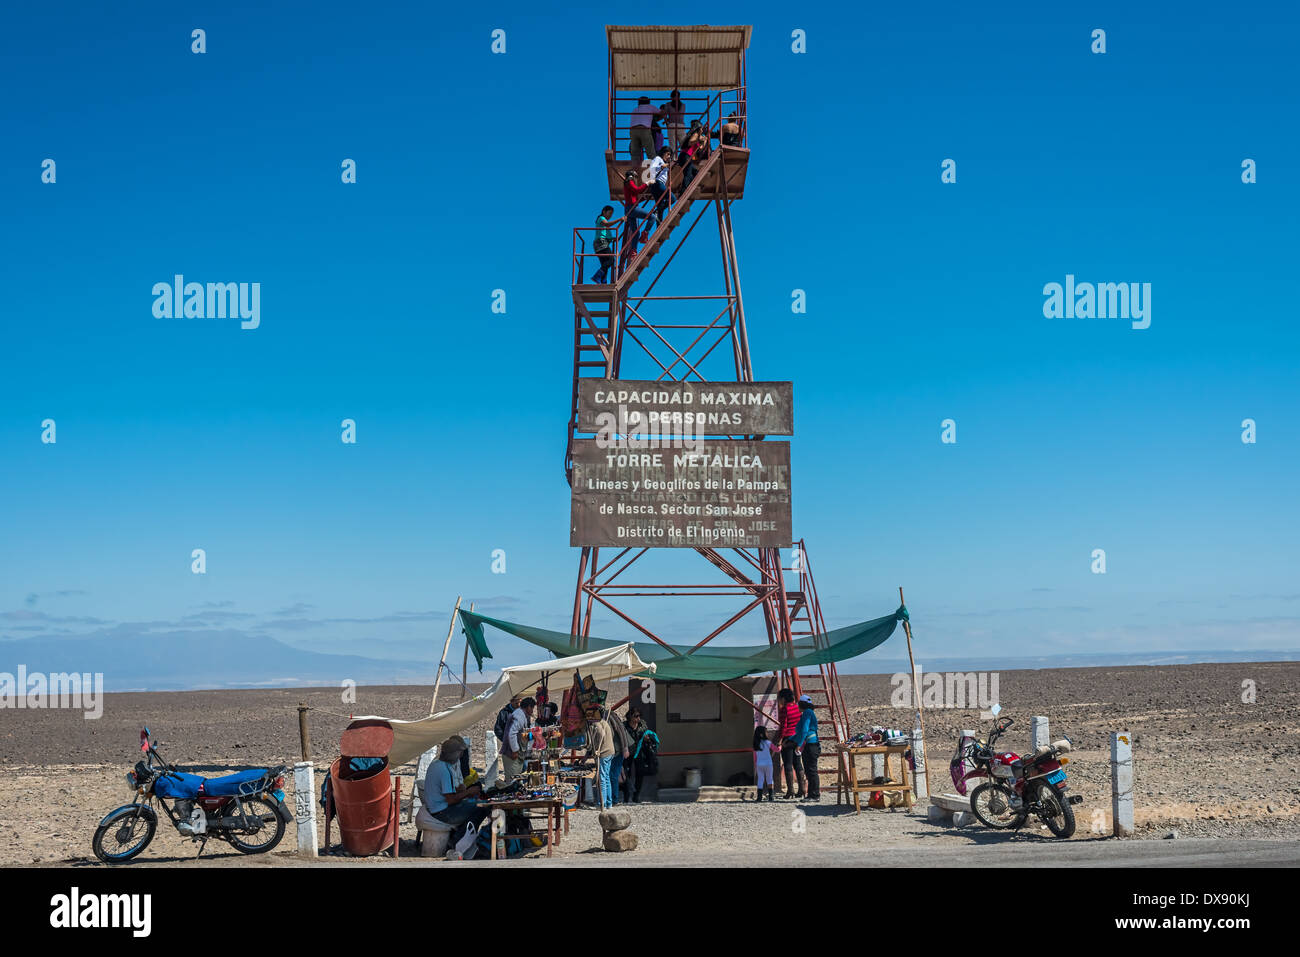 Nazca, Peru - July 31, 2013: people at the nazca lines observation tower in the peruvian coast at Ica Peru on july 31, 2013 Stock Photo